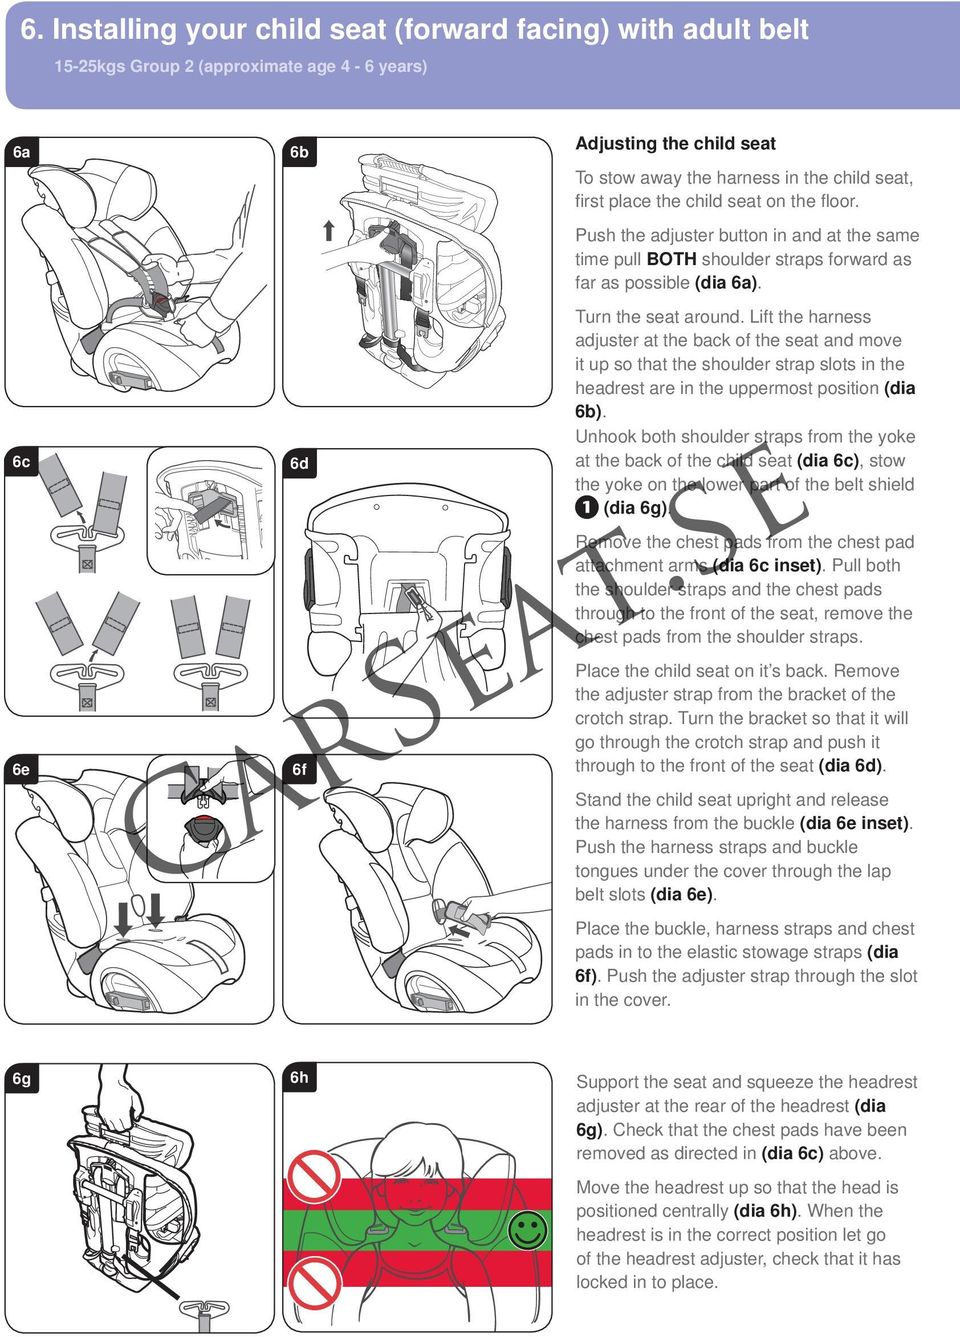 Lift the harness adjuster at the back of the seat and move it up so that the shoulder strap slots in the headrest are in the uppermost position (dia 6b).